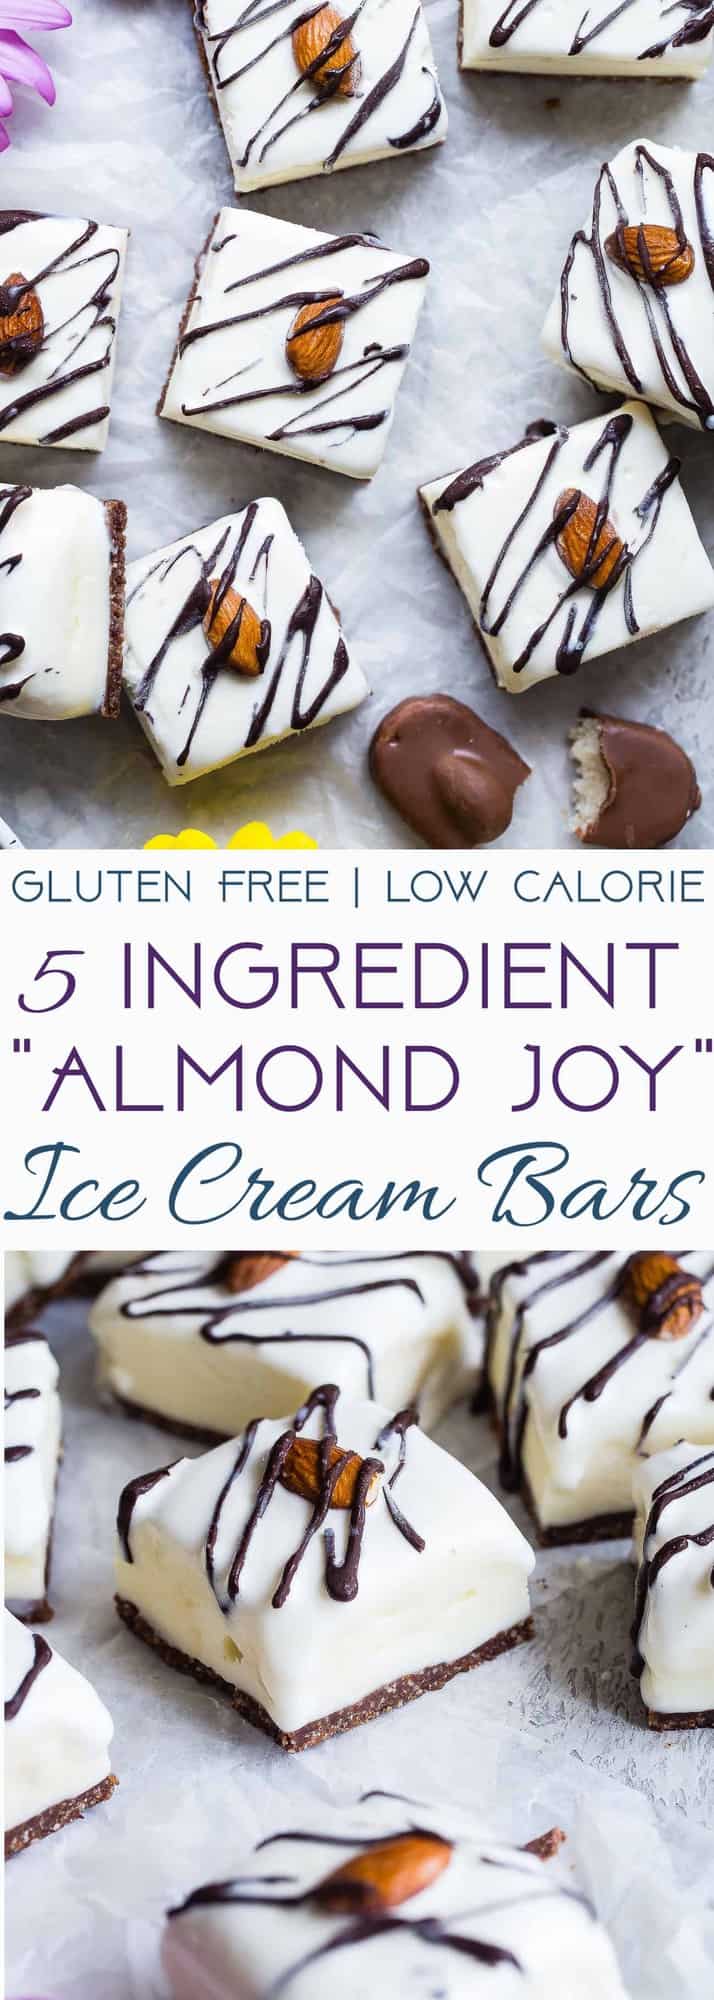 Healthy Almond Joy Ice Cream Bars -  These easy, 5 ingredient Almond Joy Ice Cream Bars are a healthier, protein packed Summer dessert that is gluten free and  only 116 calories! Kids and adults are going to LOVE these! | #Foodfaithfitness | #Glutenfree #Healthy #NoBake #Chocolate #Dessert